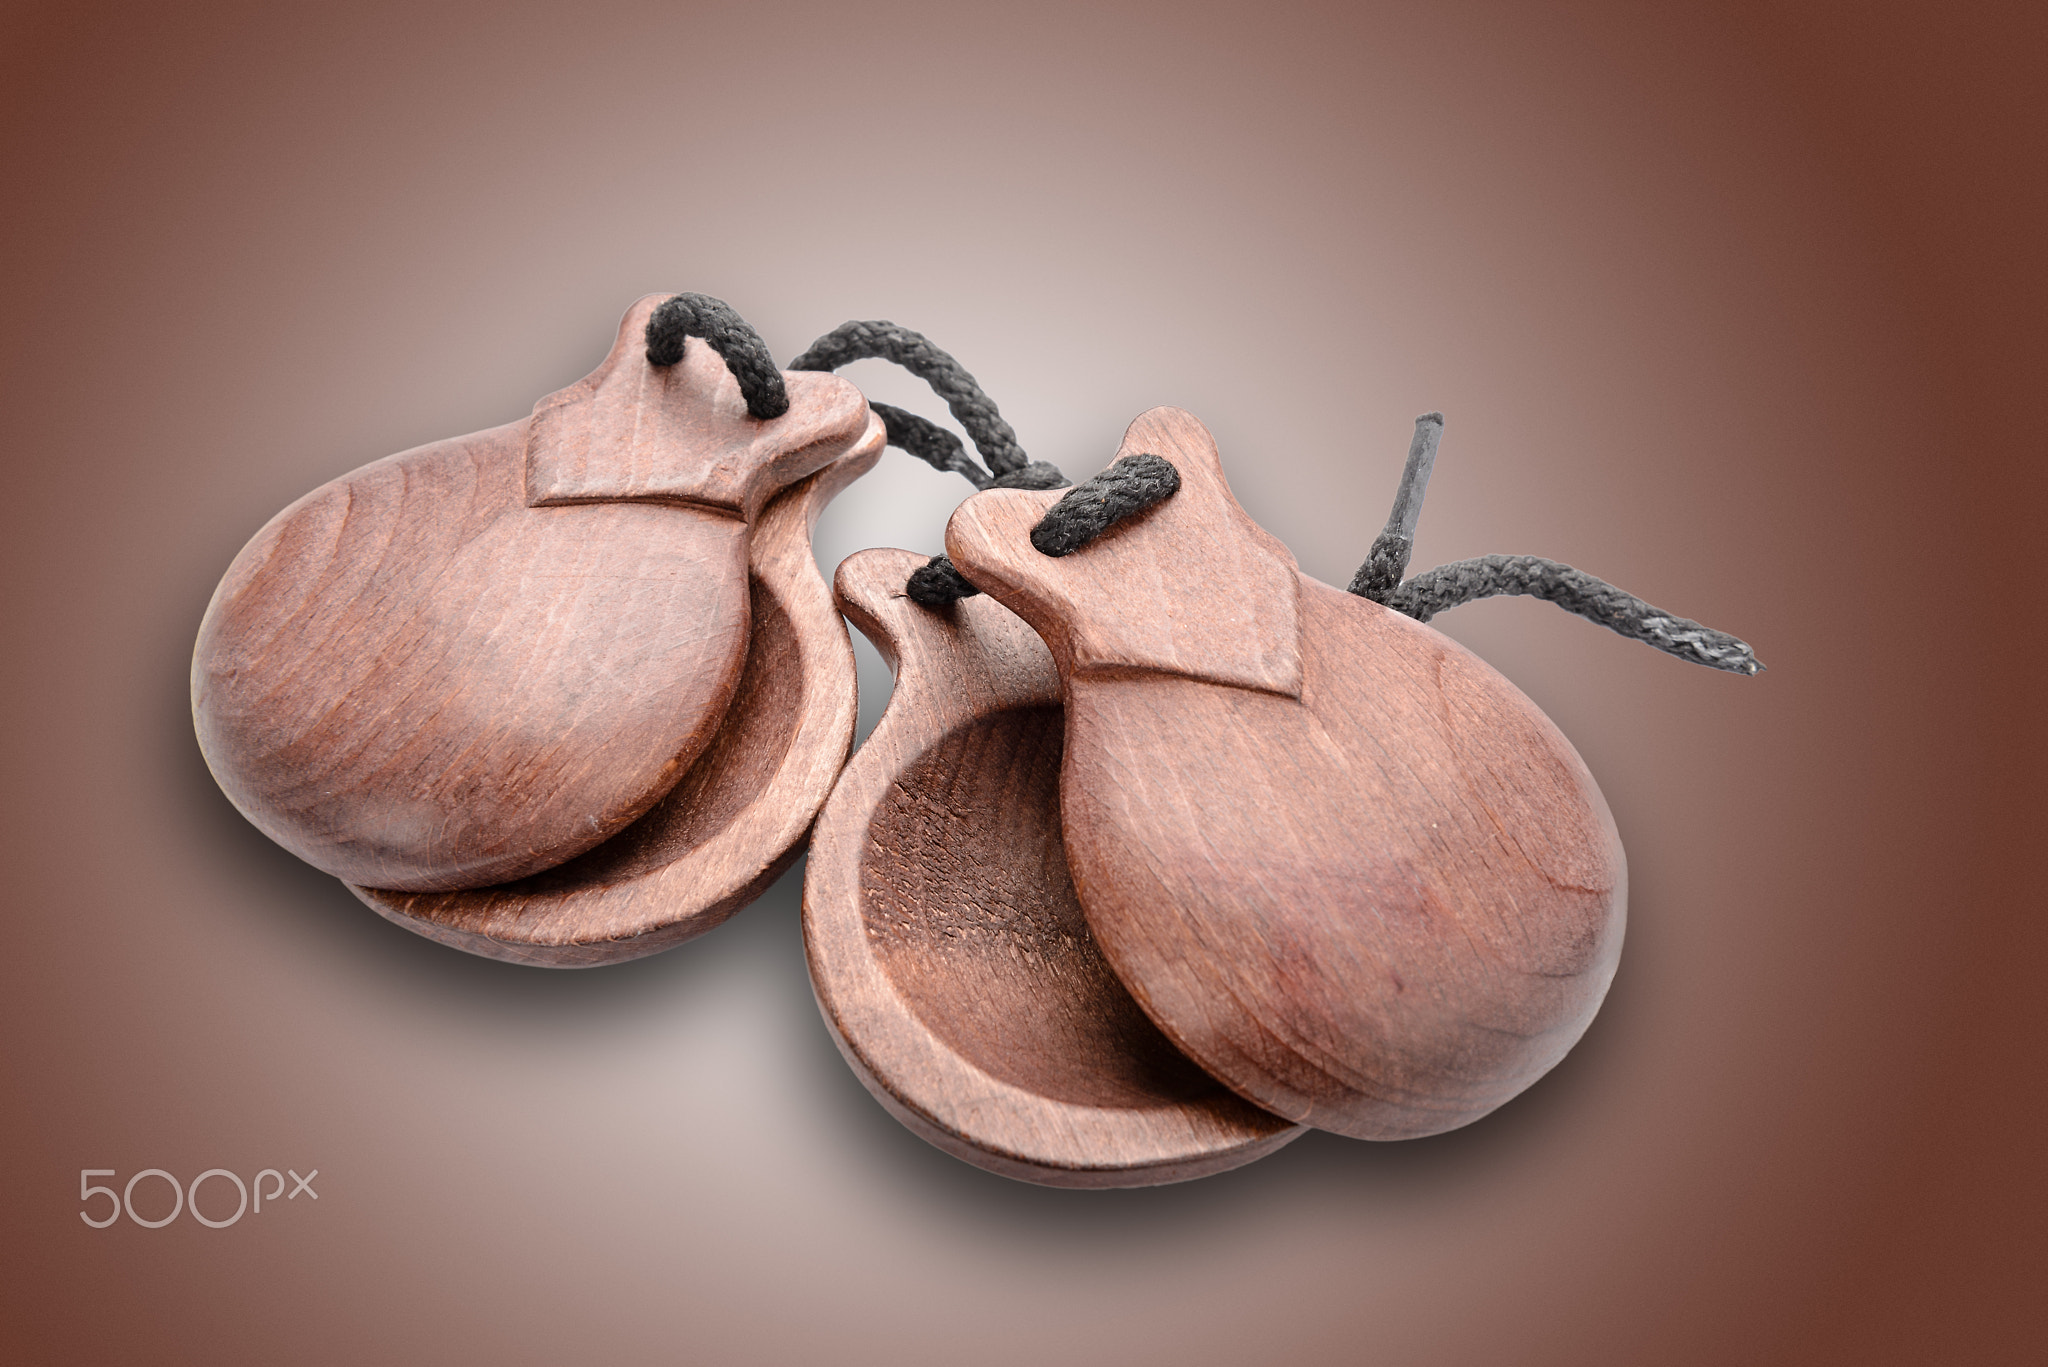 Brown, wooden castanetes on brown background.